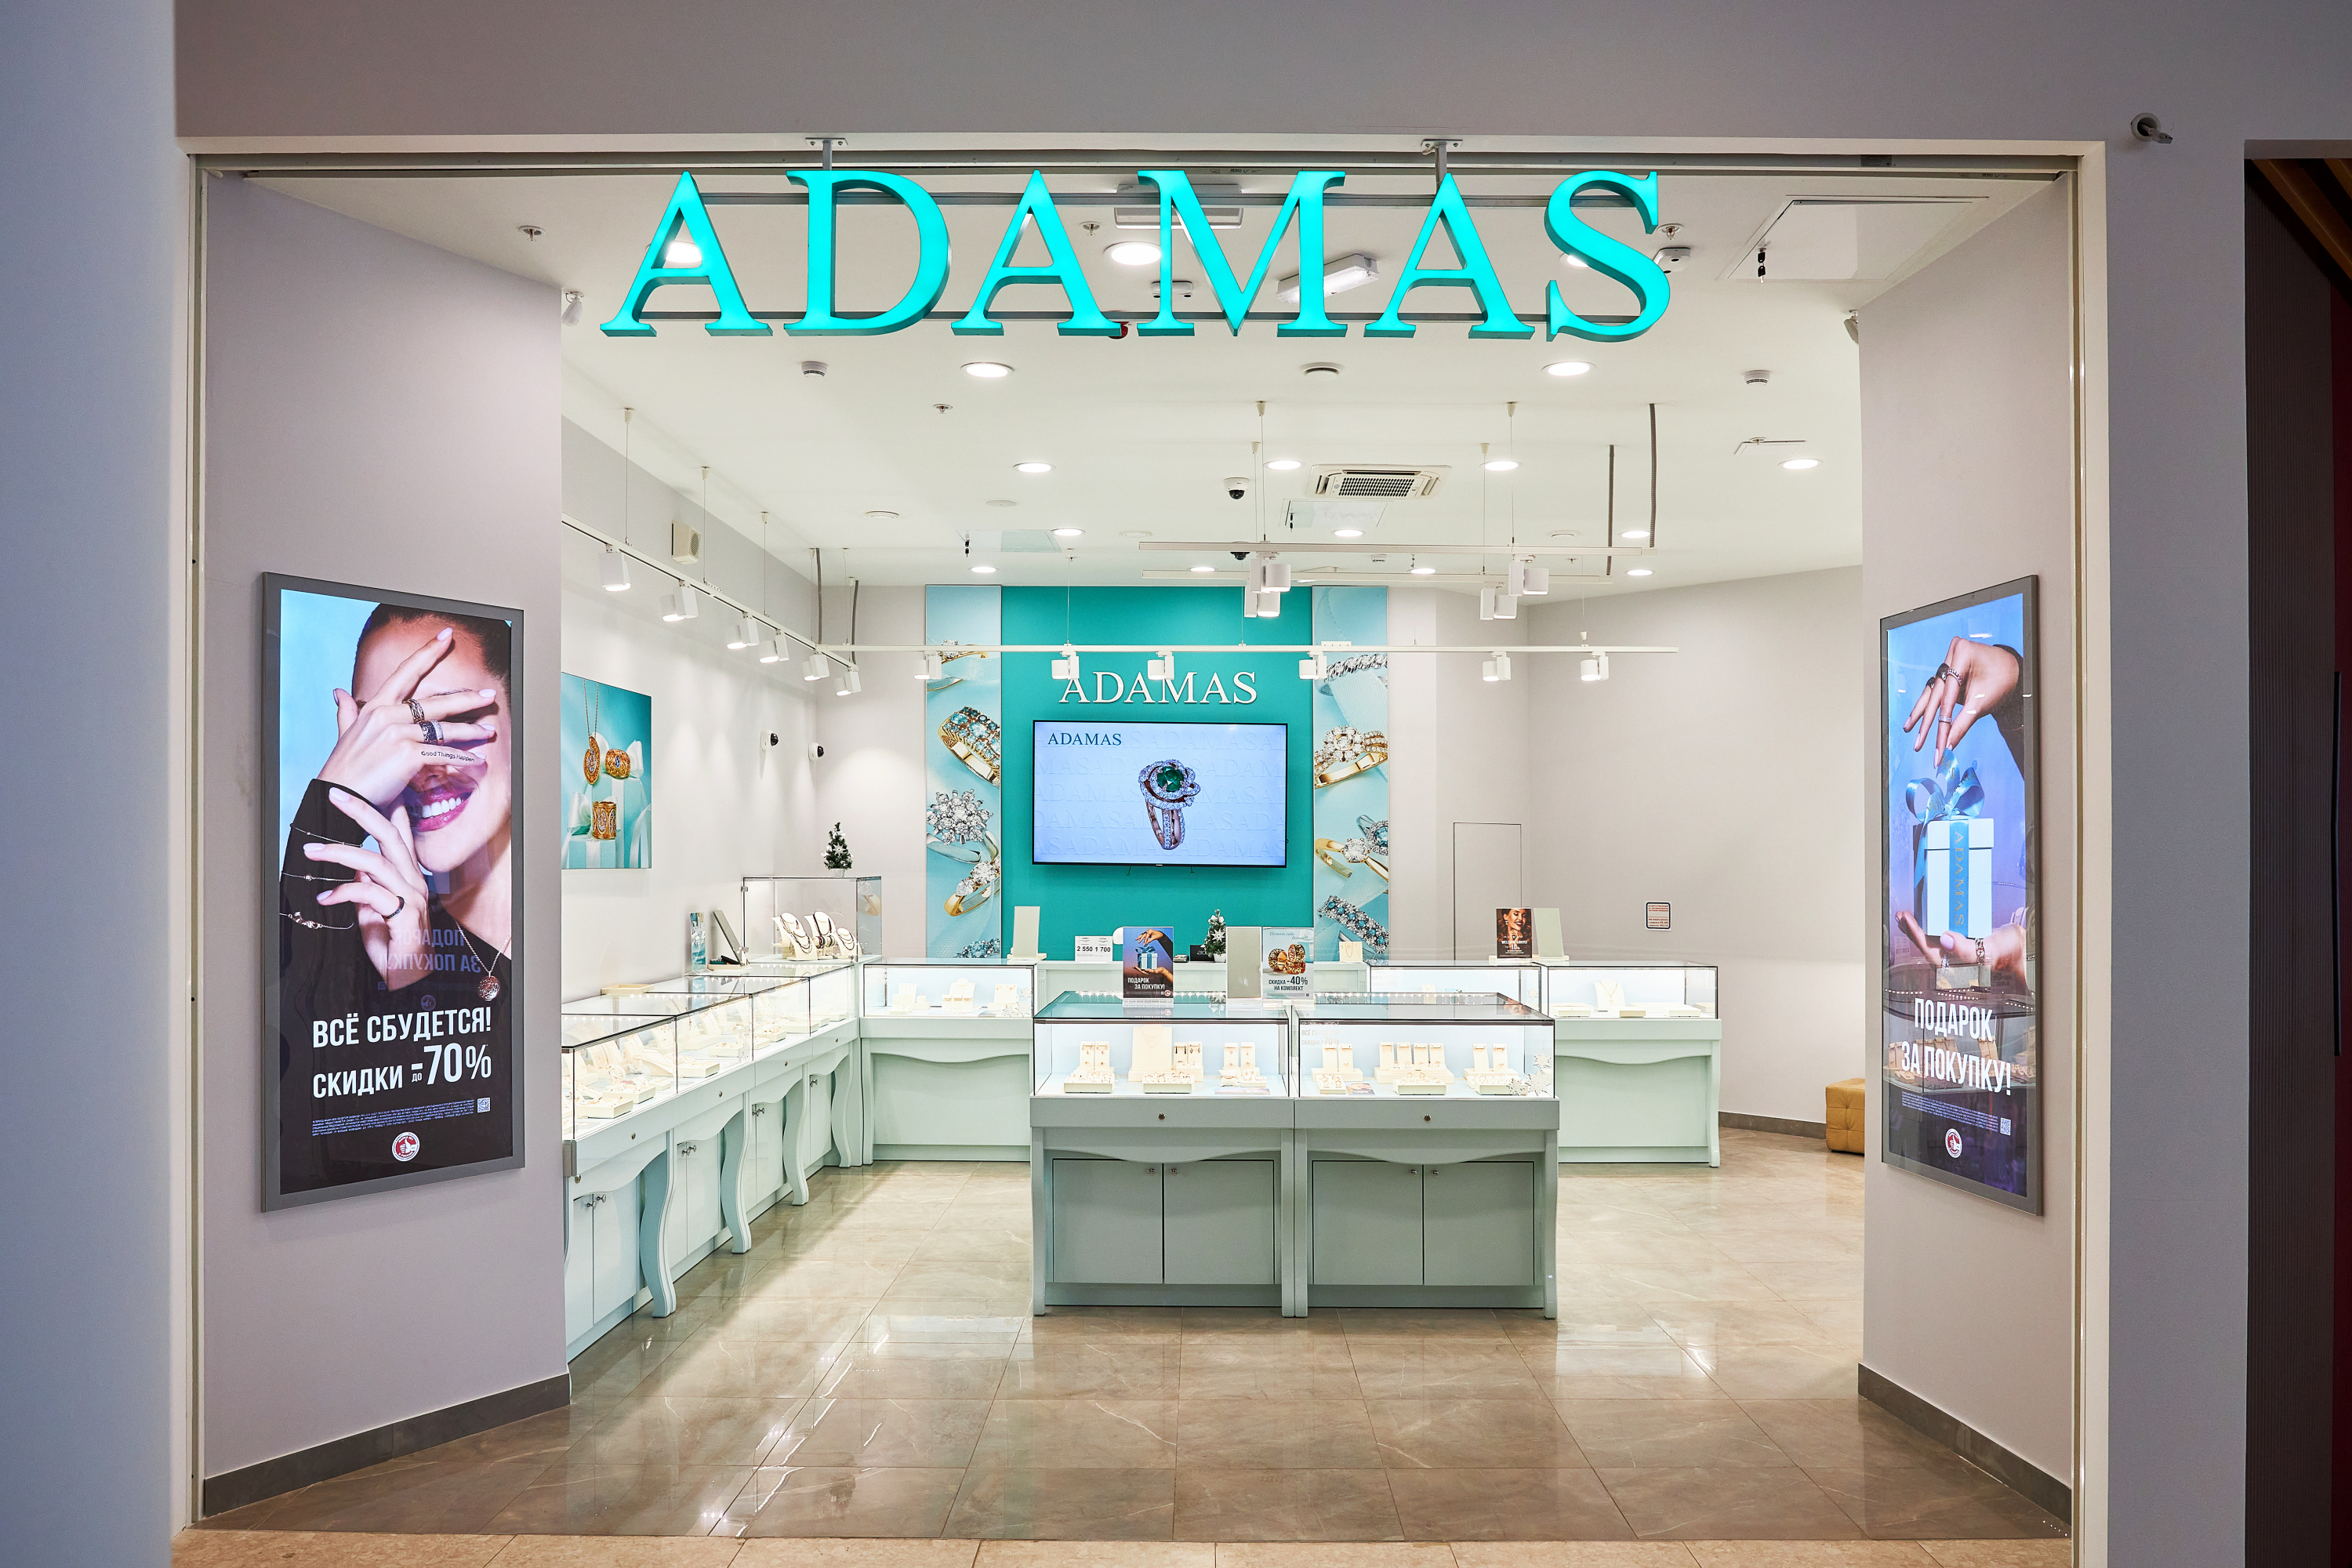 Adamas, Russia's fifth largest jewellery retailer, expands into